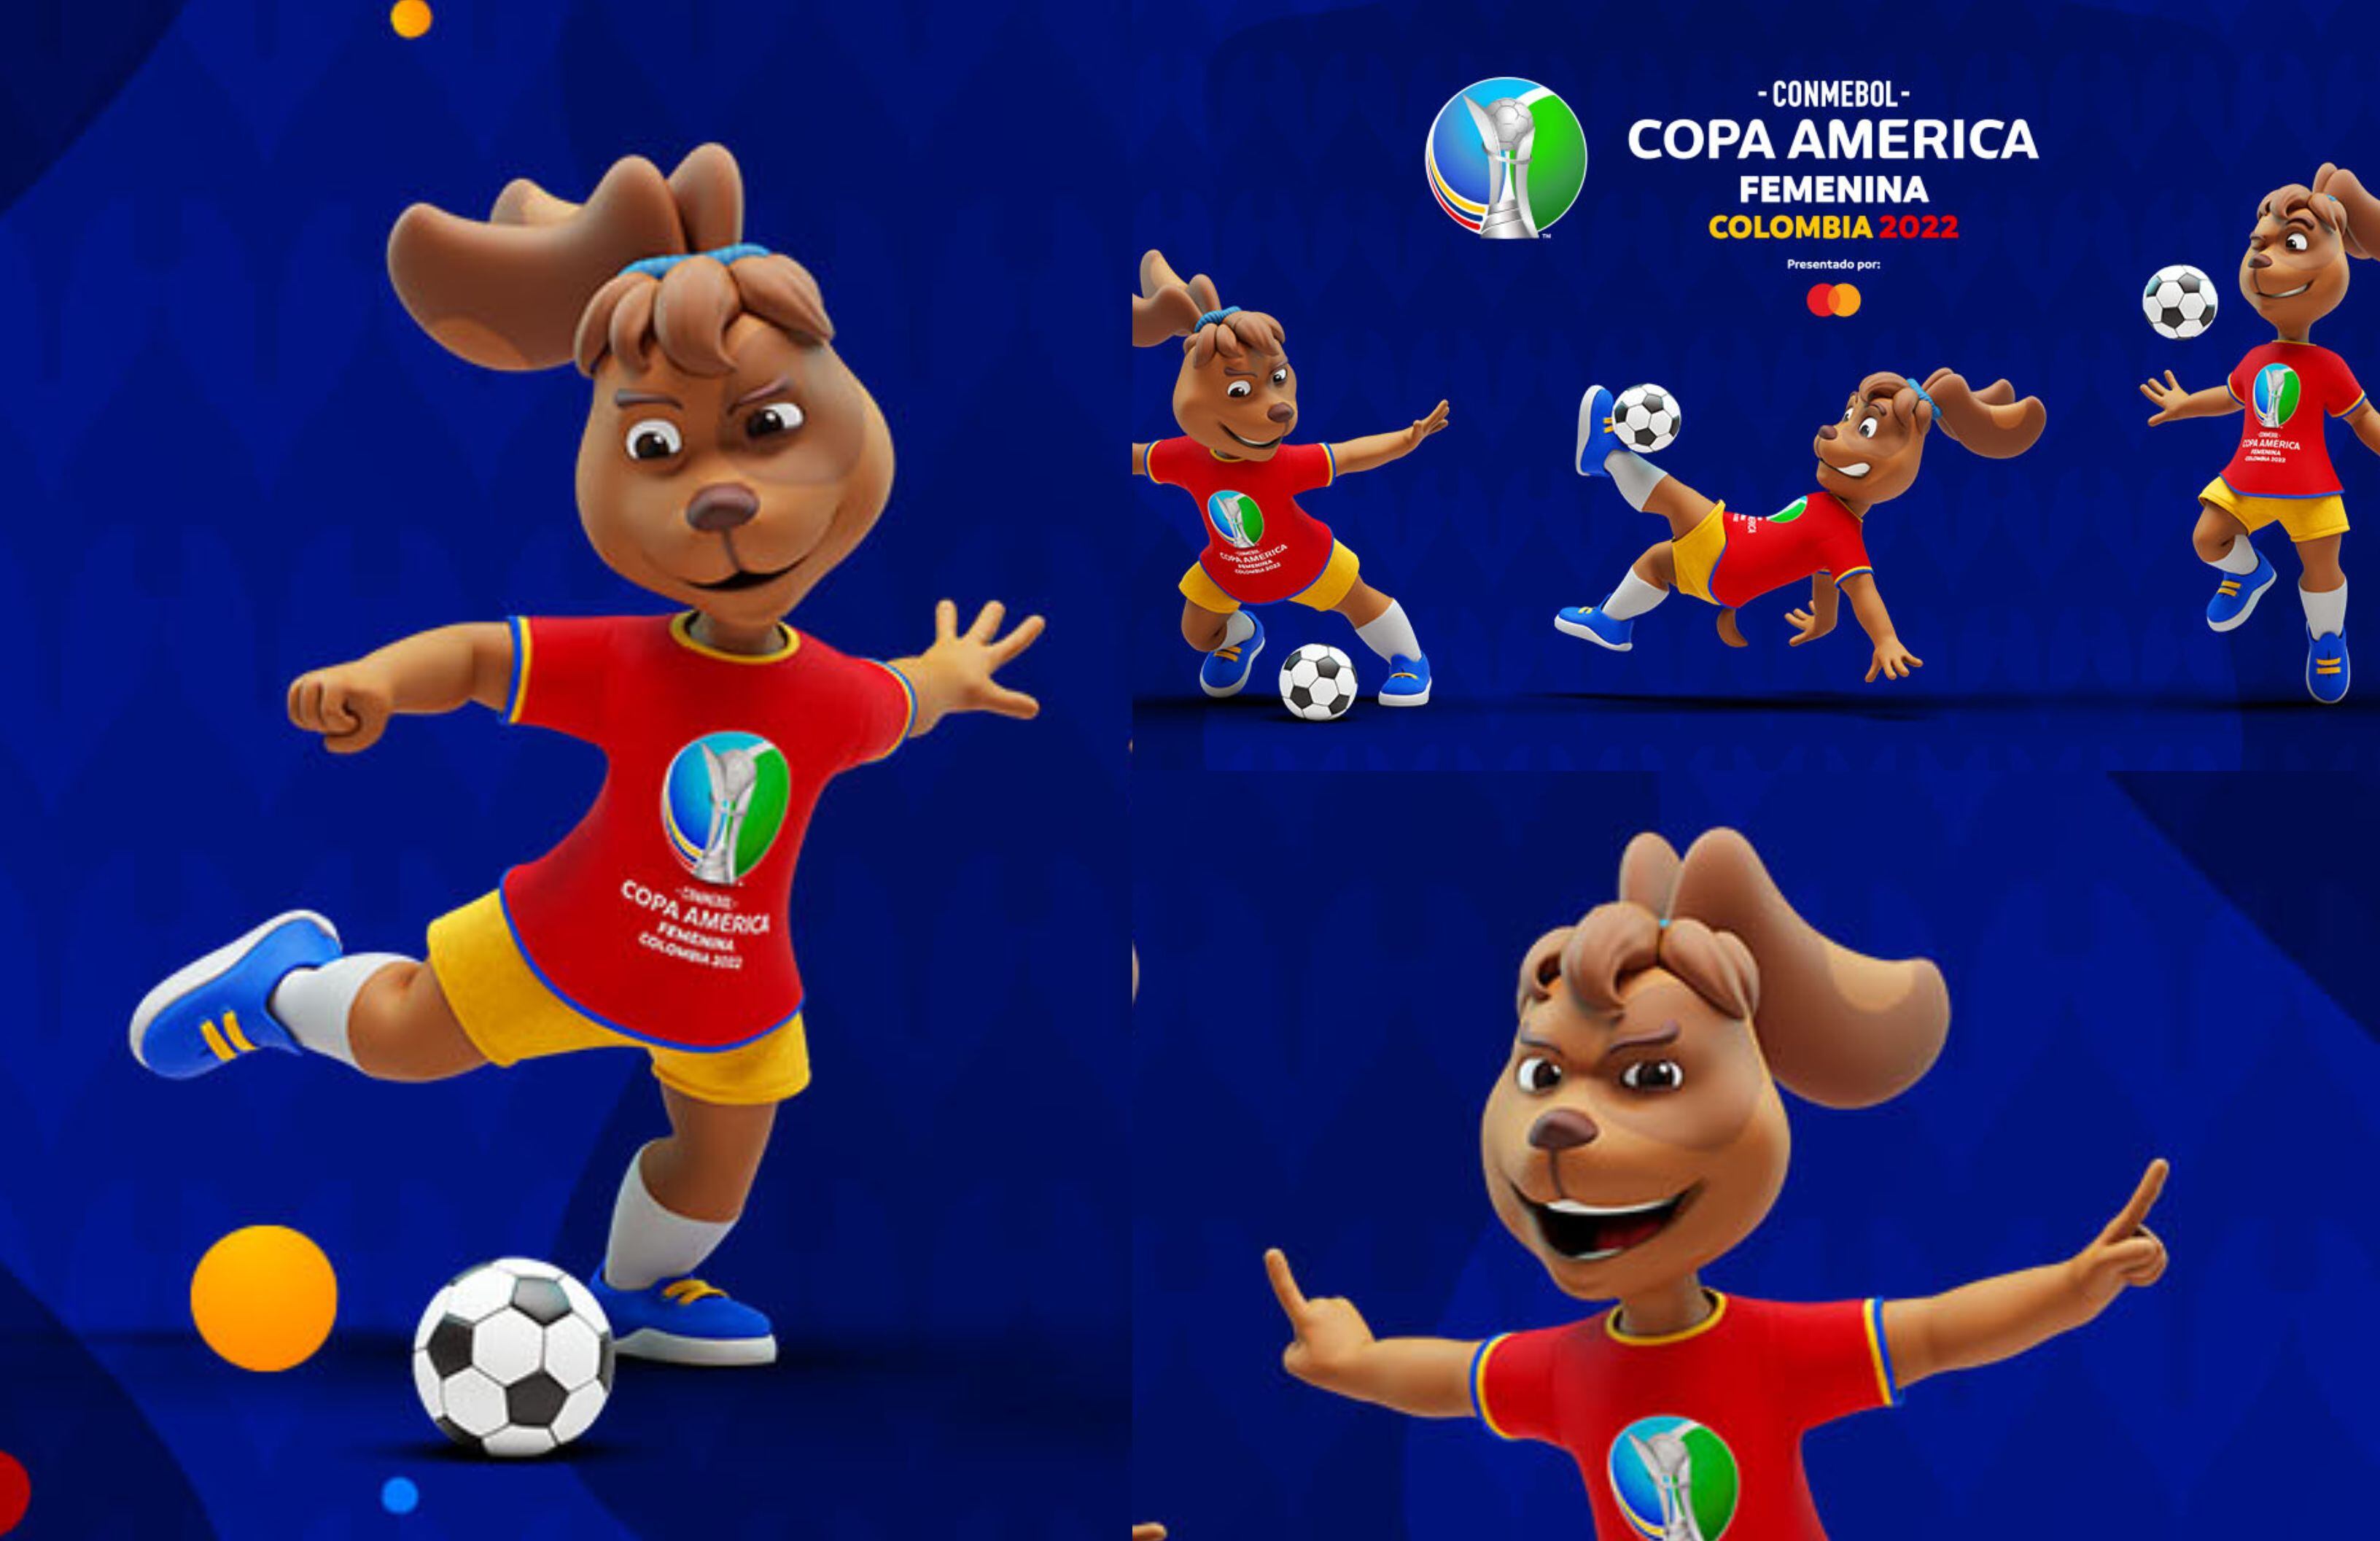 Cartoon Illustrations of Dog Football or Soccer Player Character